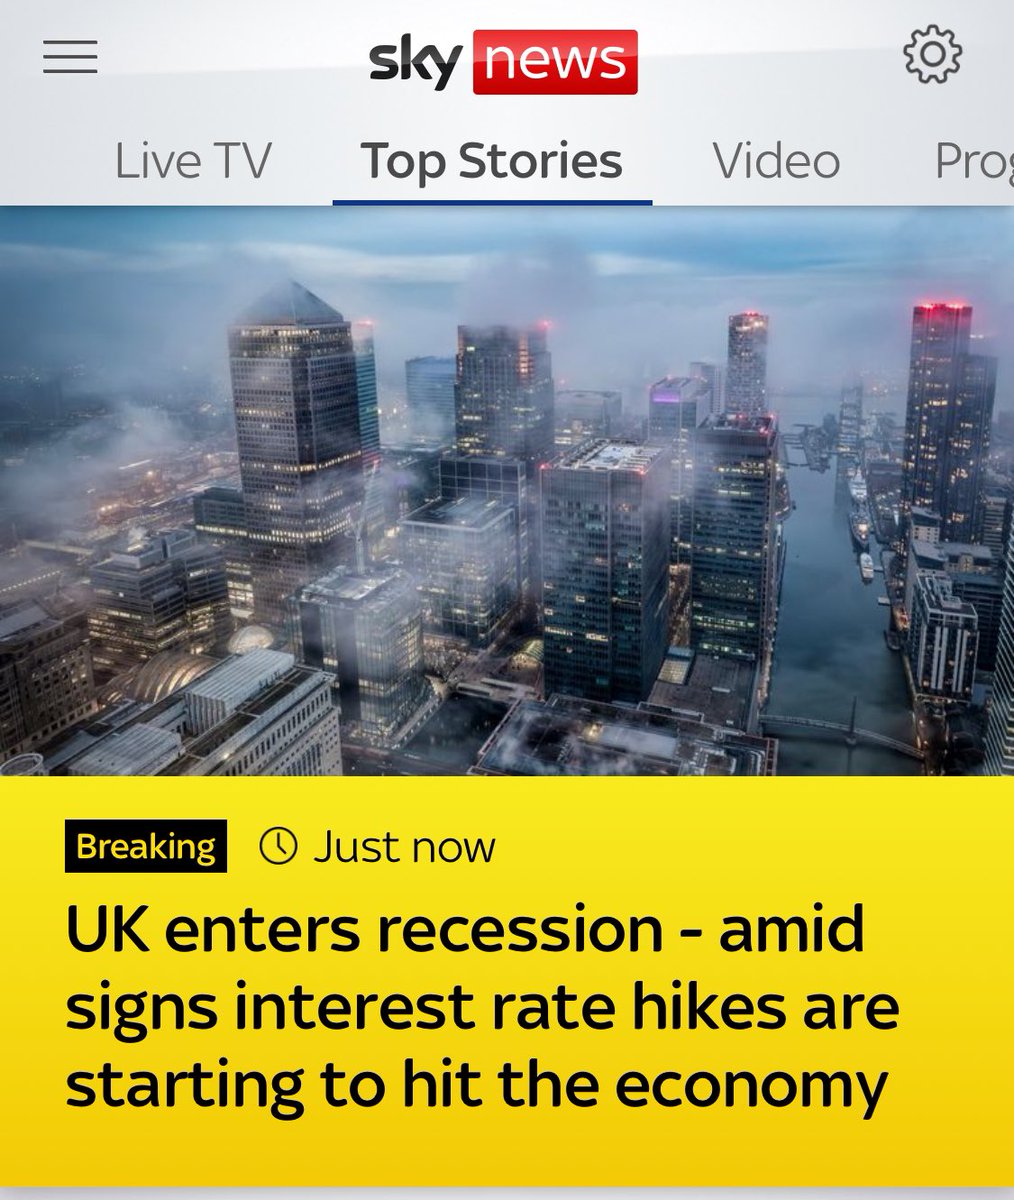 Maybe you shouldn’t have given away our money away or borrowed it to give it away to Rwanda for that money pit bill @RishiSunak @Conservatives #UKRecession #RishiRecession #ToryRecession